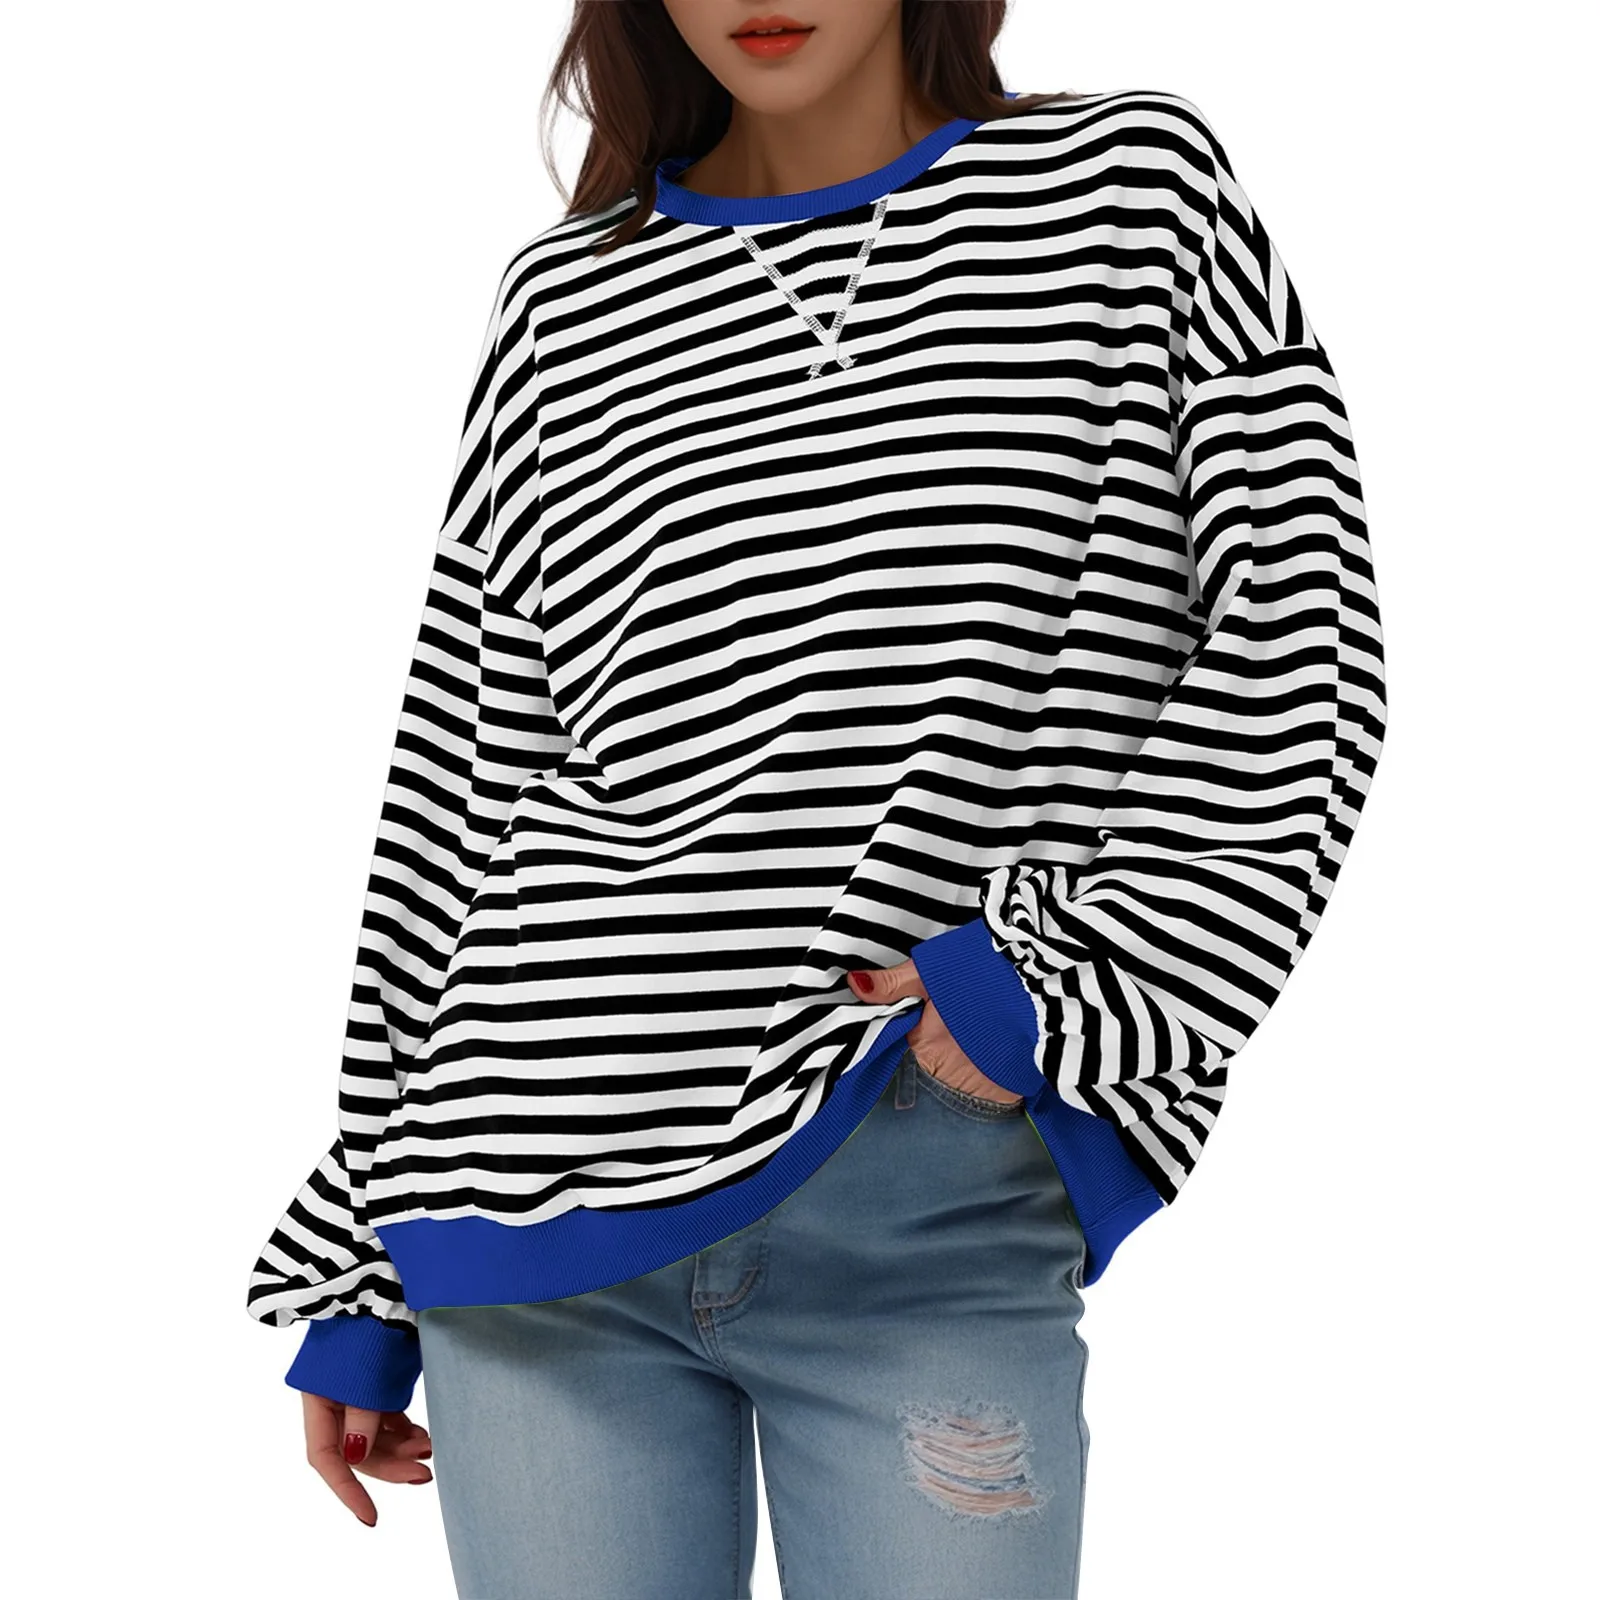 

Women'S Oversized Striped Color Blocking Long Sleeved Round Neck Sports Shirt Casual Loose Fitting Pullover Shirt Top 블라우스